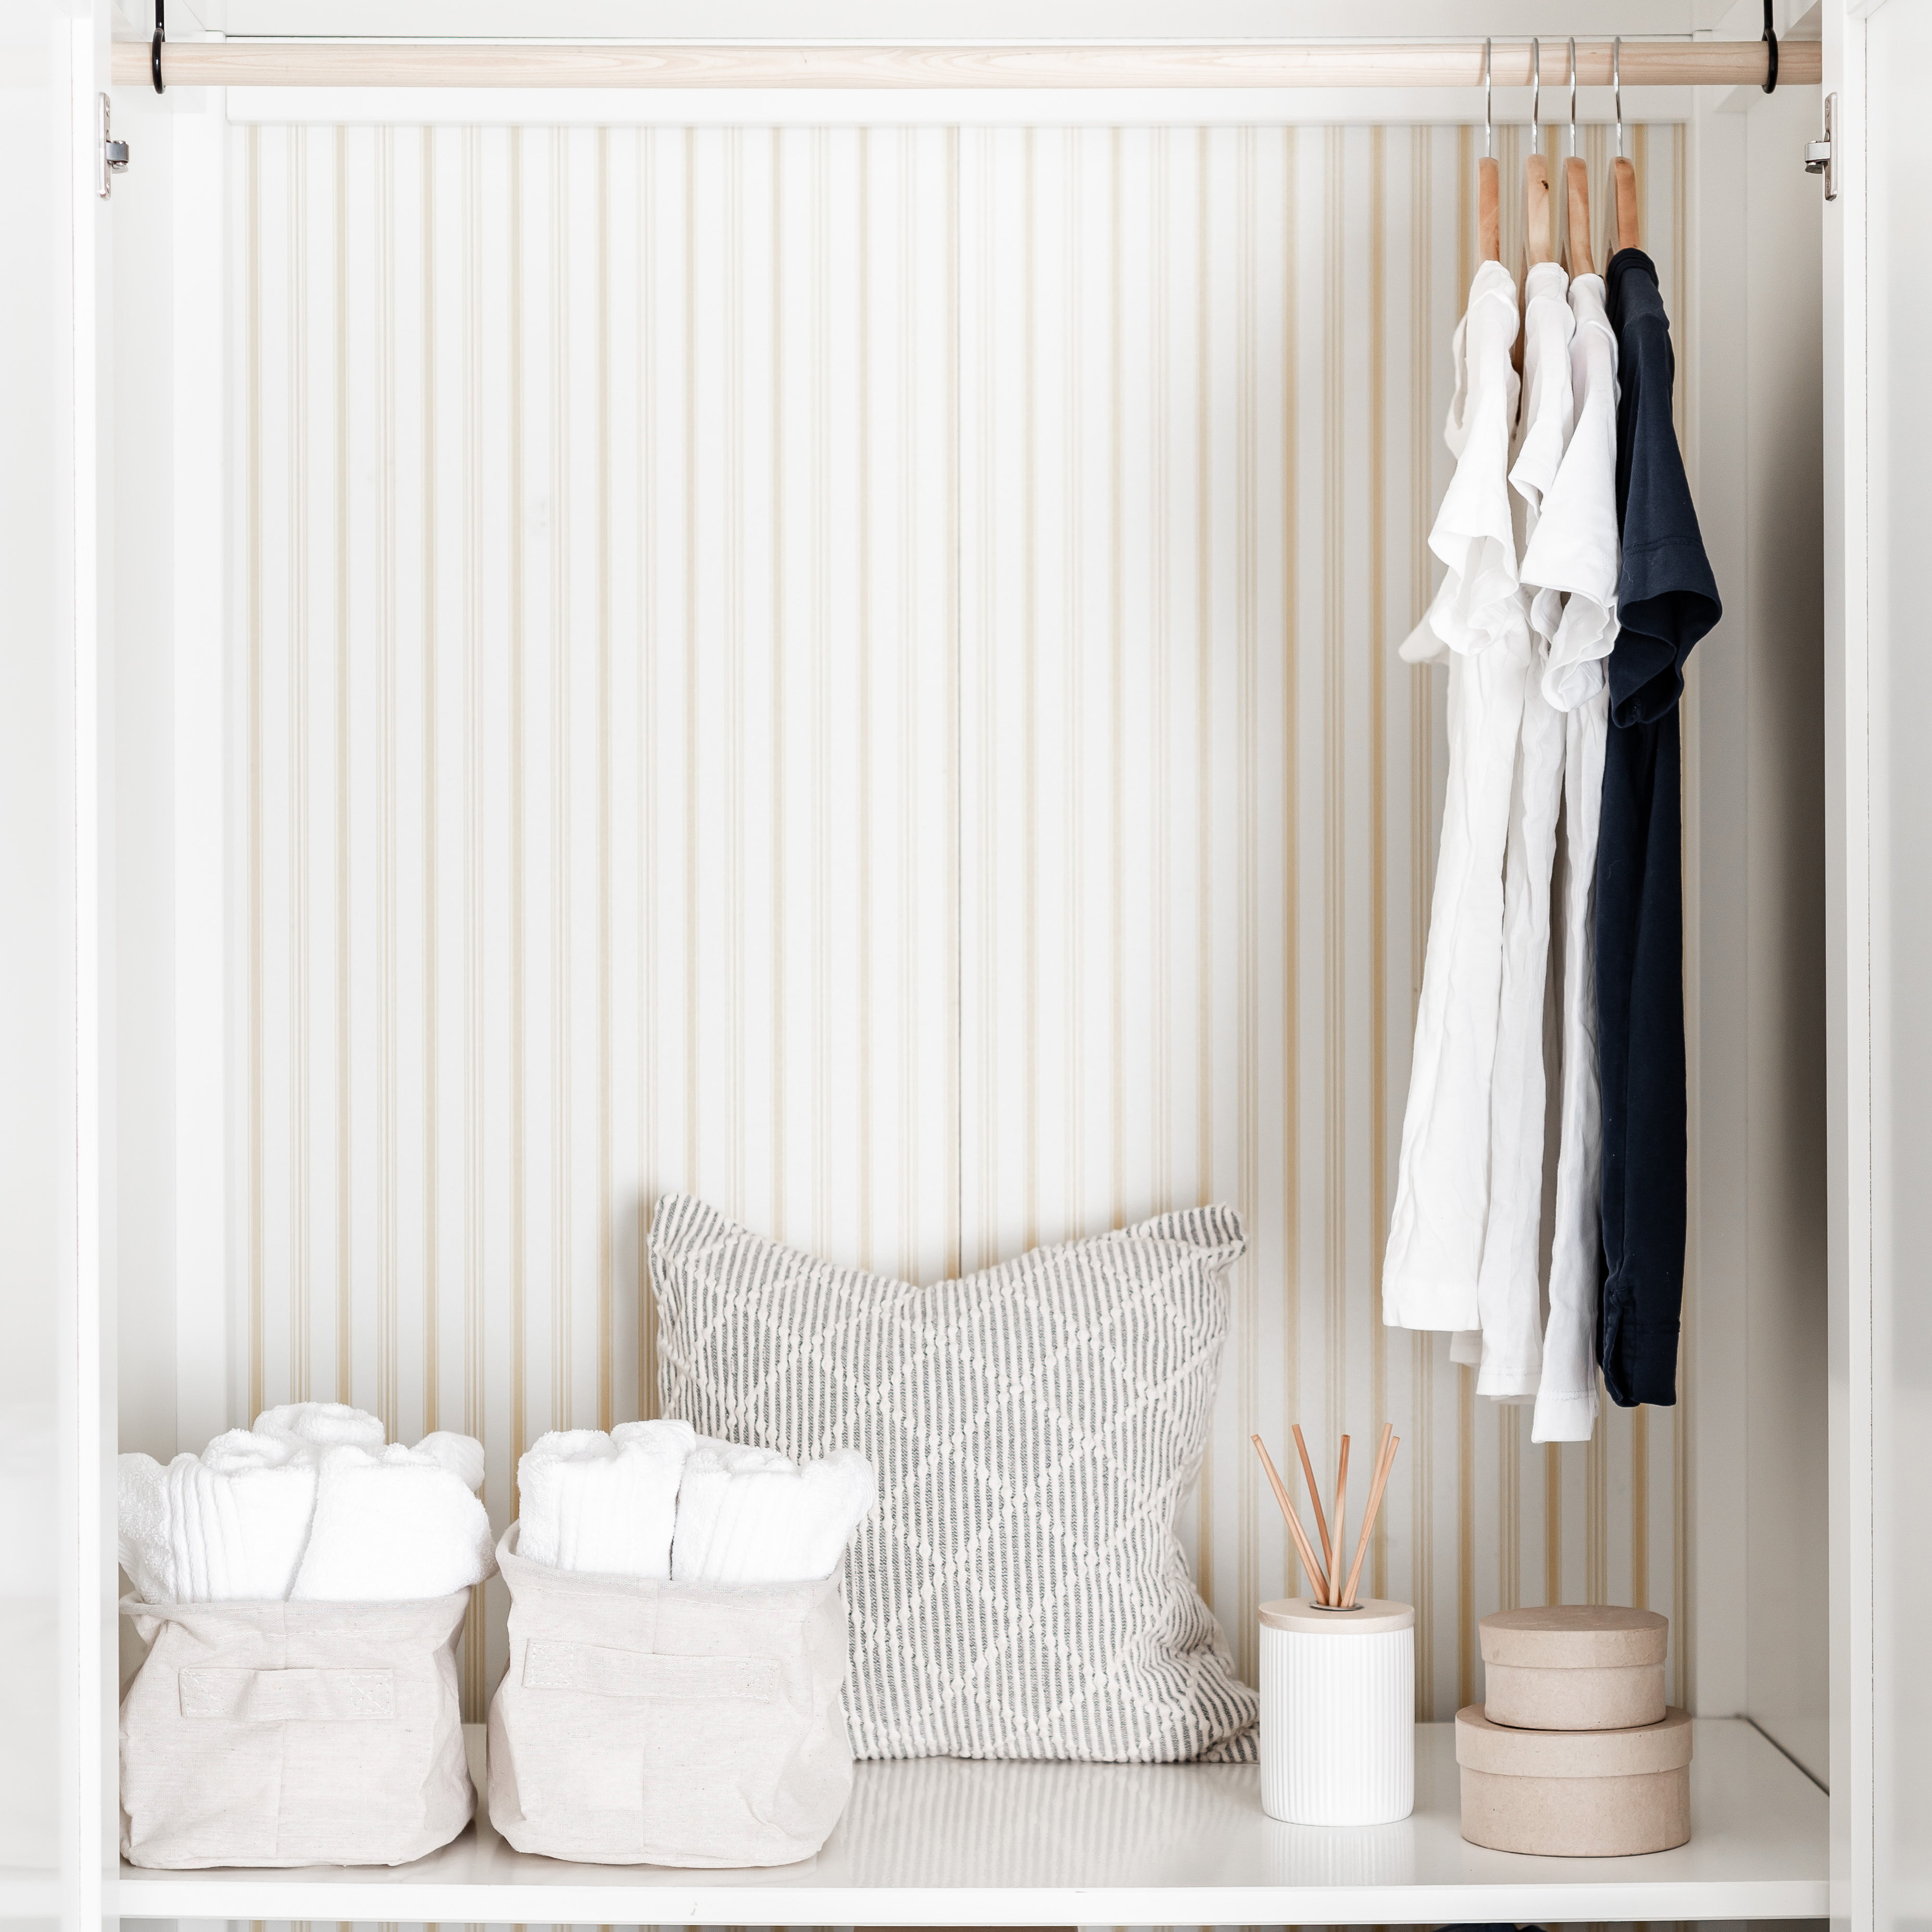 white-and-black-shirts-on-a-wooden-hanger-in-a-wardrobe